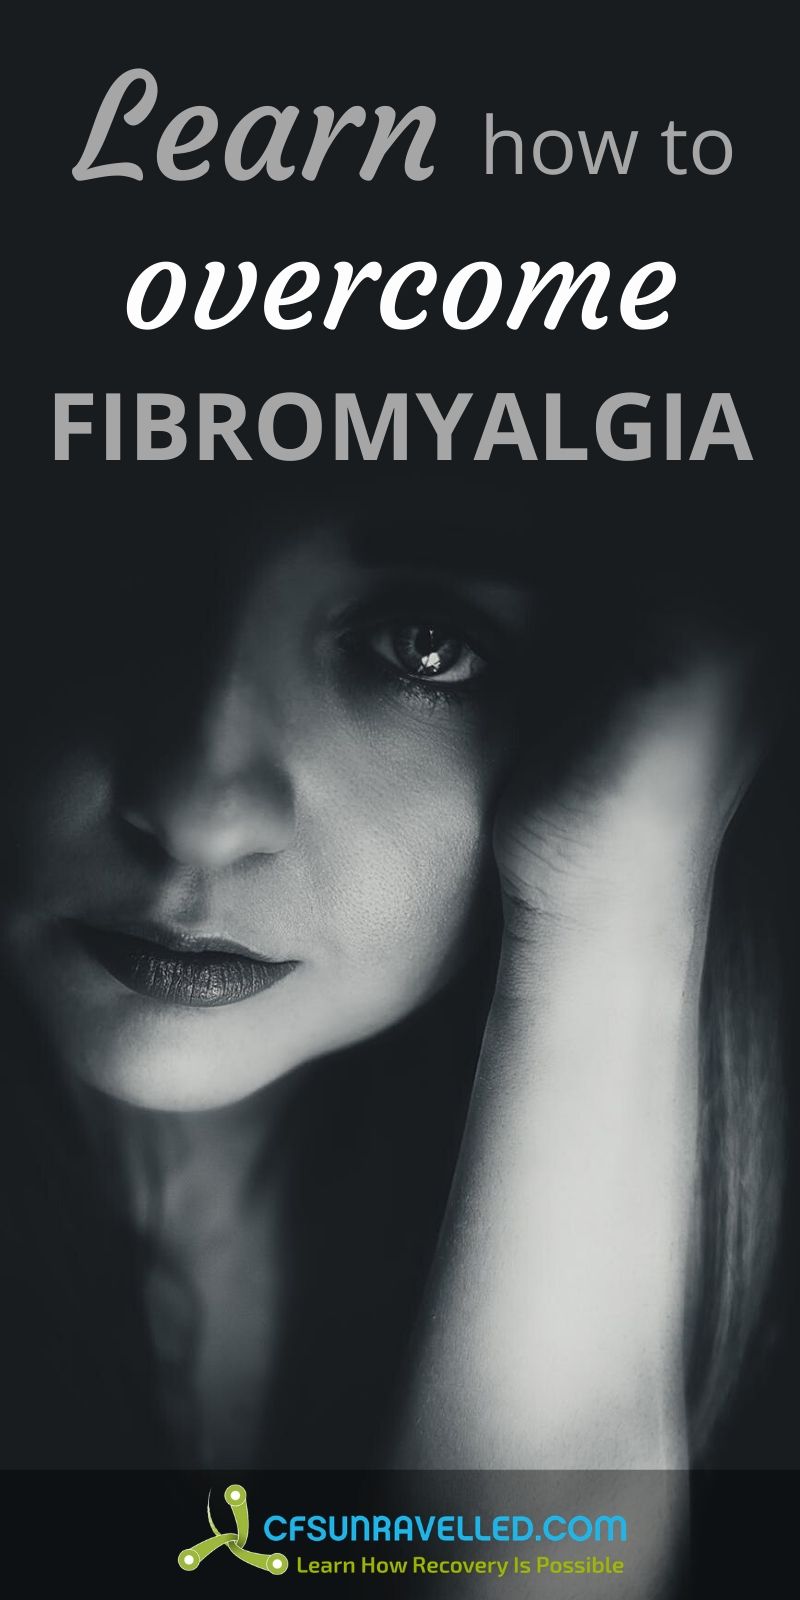 Portrait of  woman looking from dark with learn how to overcome Fibromyalgia text